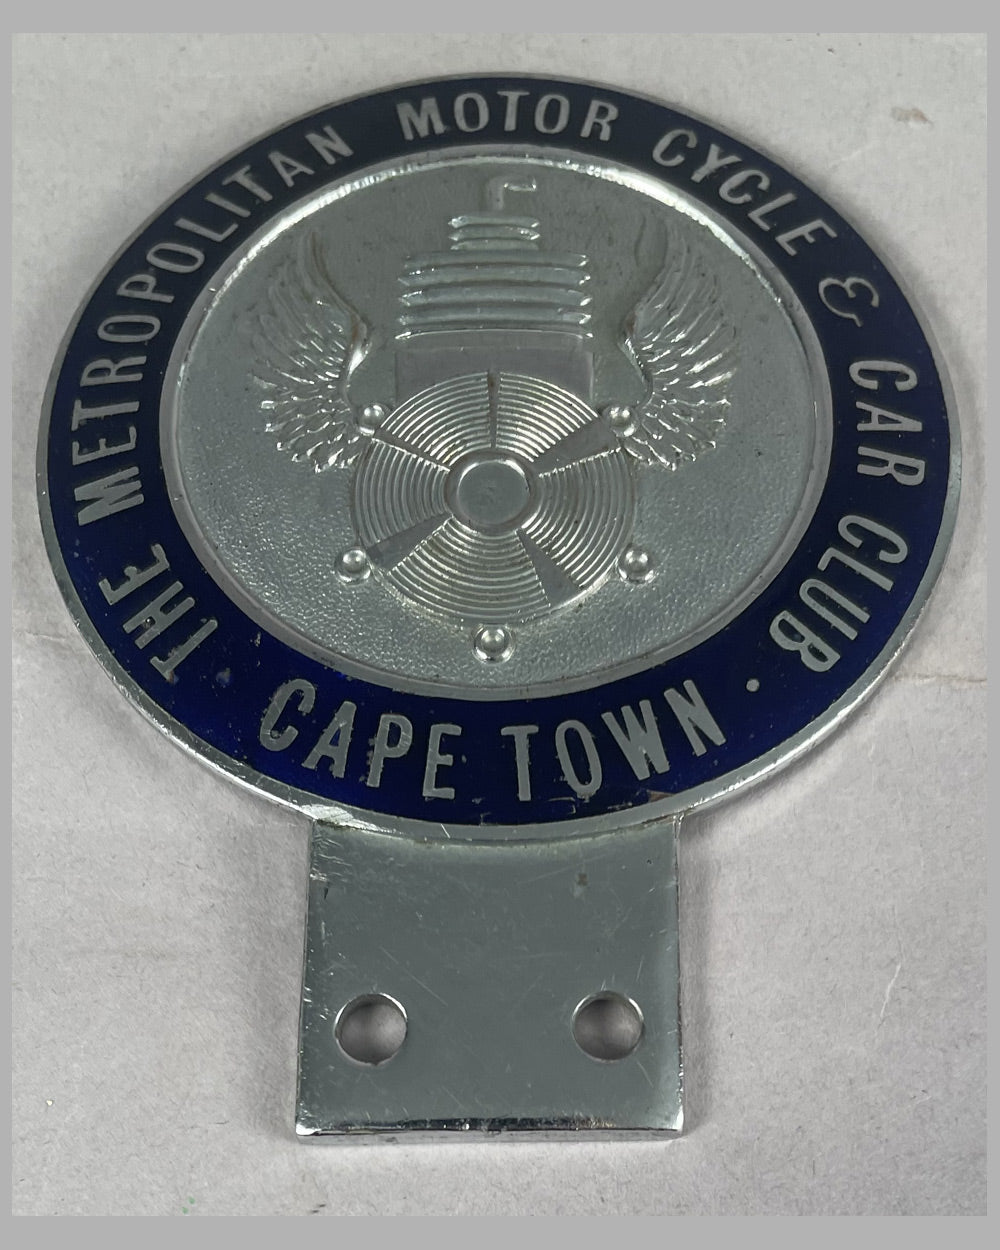 The Metropolitan Motor Cycle and Car Club, Cape Town South Africa badge